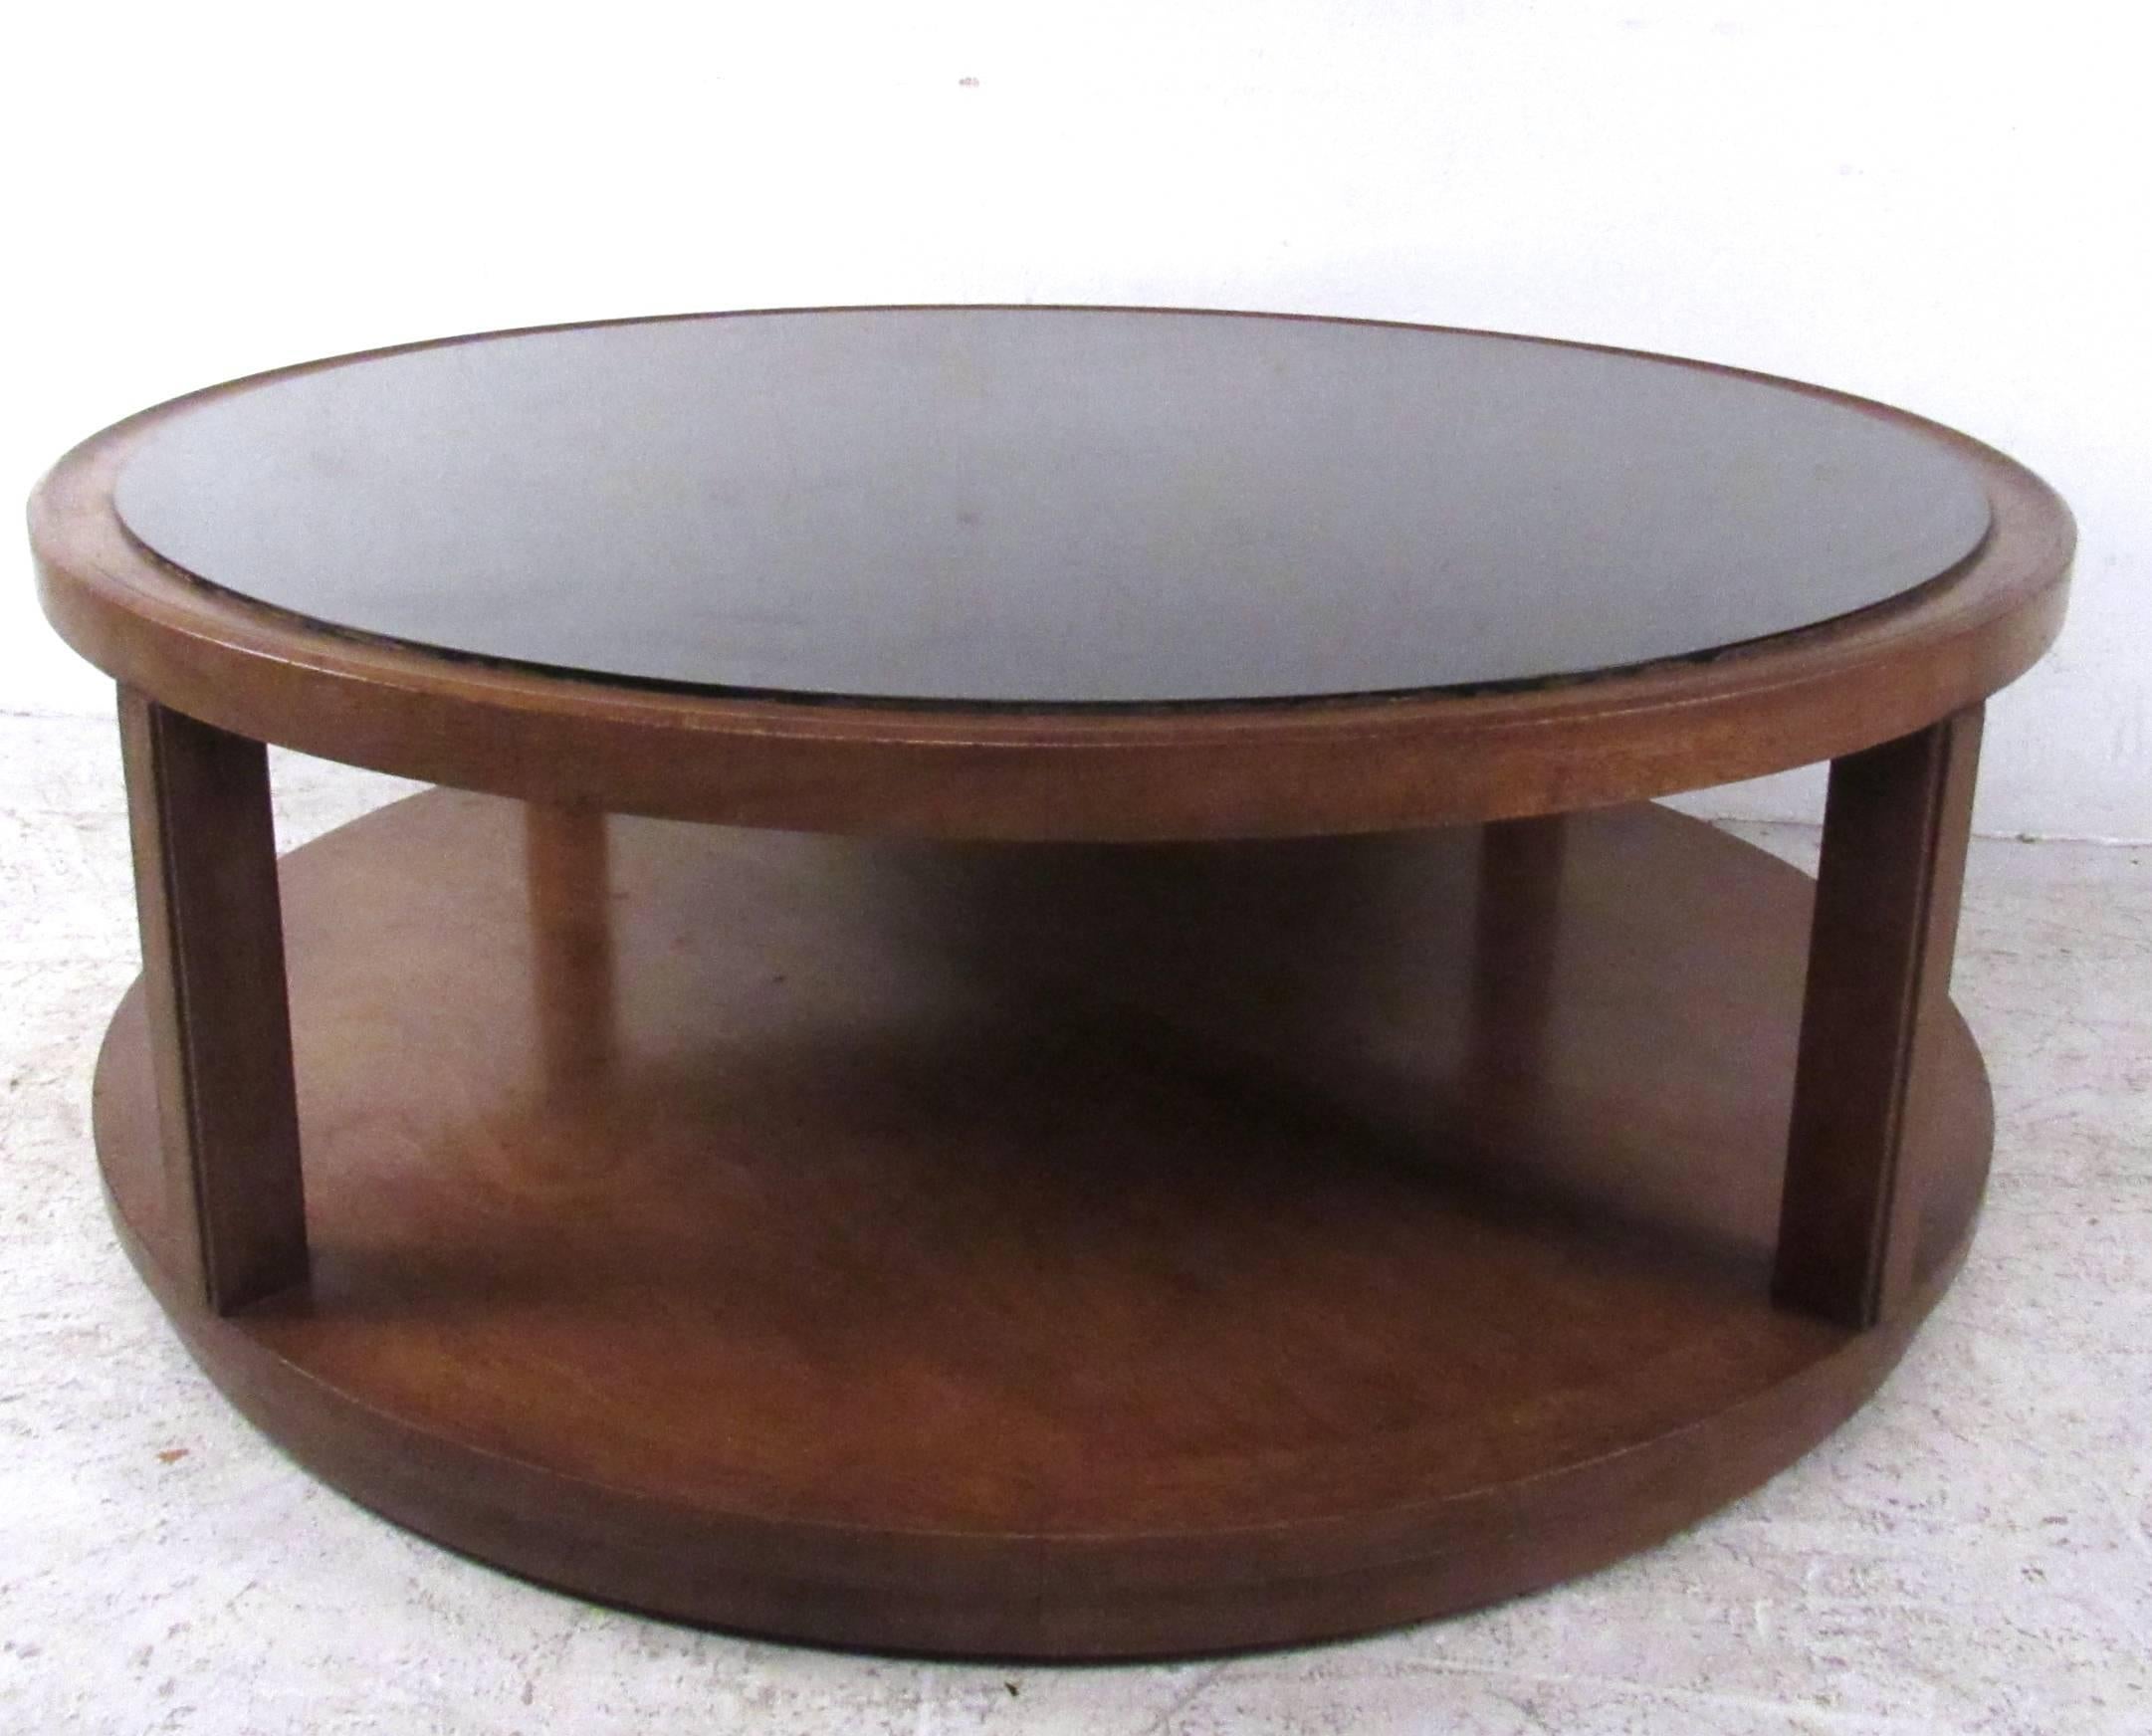 This formica style top coffee table features unique two-tier construction, with a modern style hardwood base on glides for ease of movement. Manufactured by Dunbar this wonderful center table works great in any seating area, please confirm item